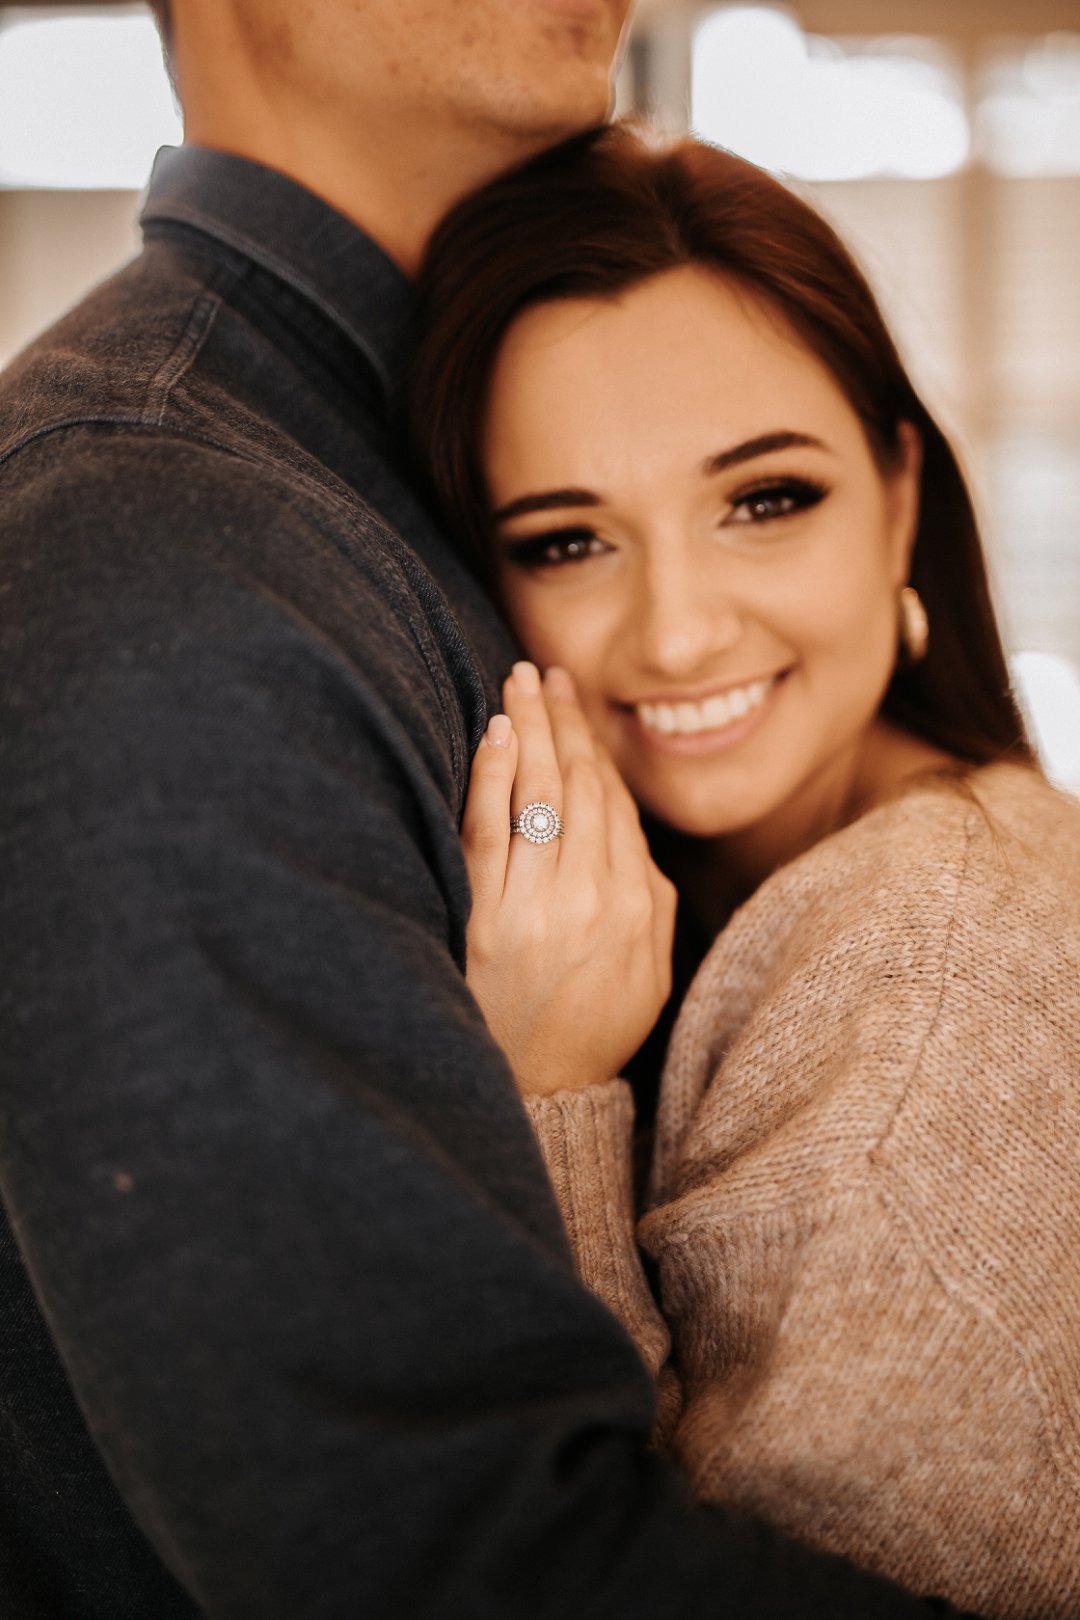 engagement photos at home